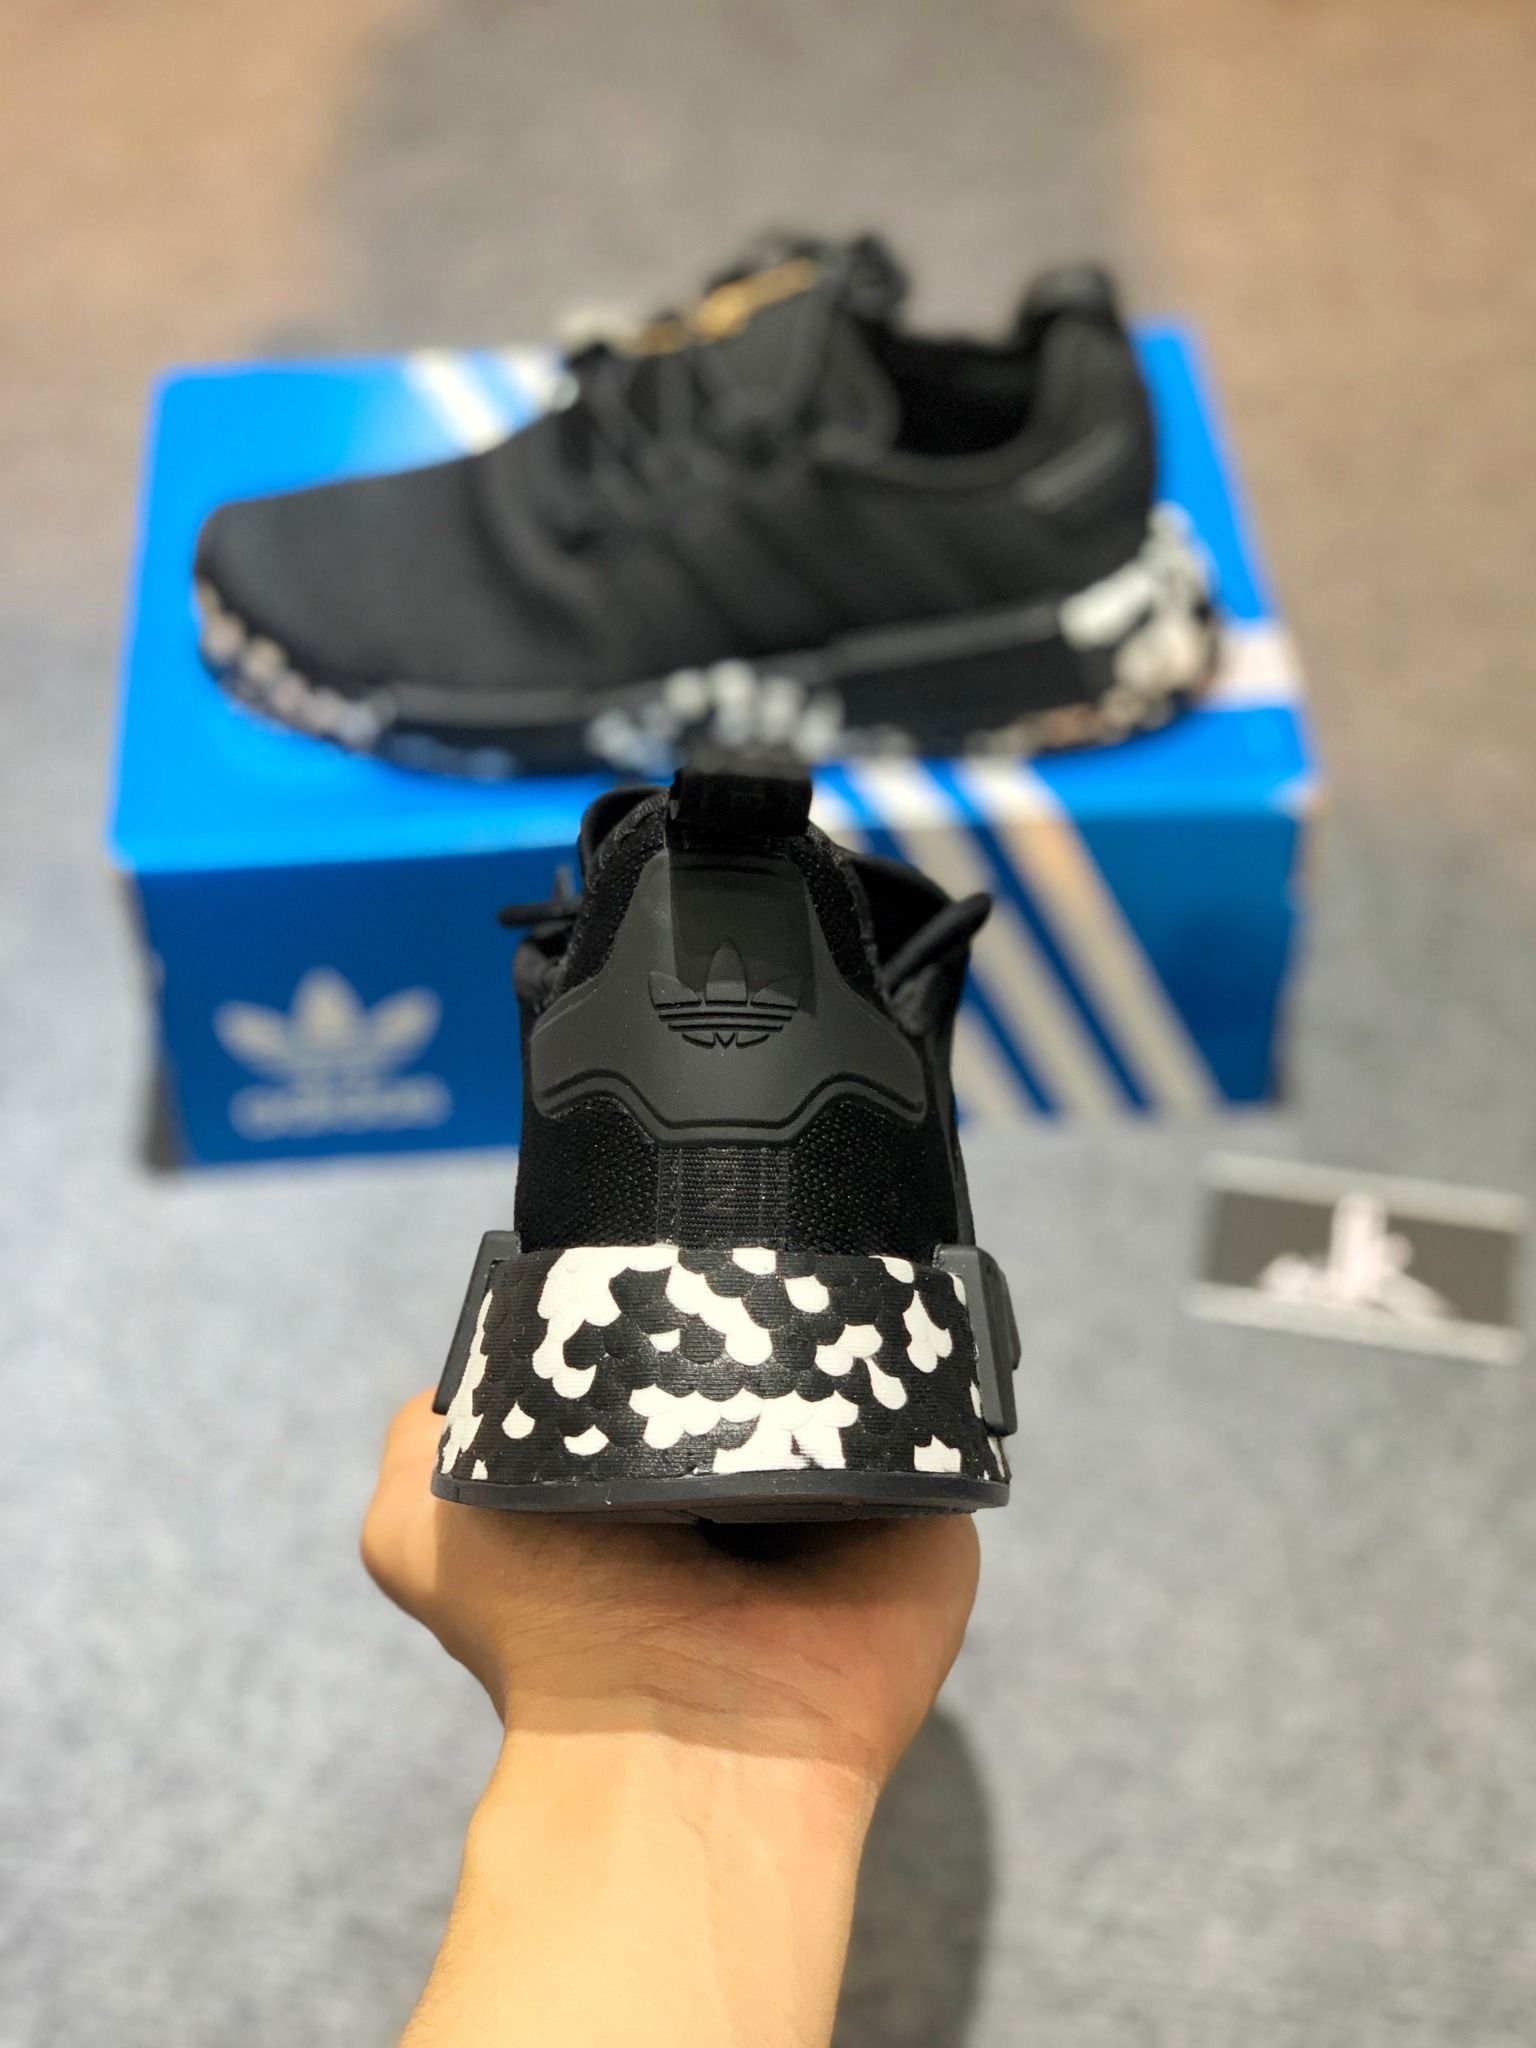  GZ4306 NMD R1 Black Speckled Camo Sole 